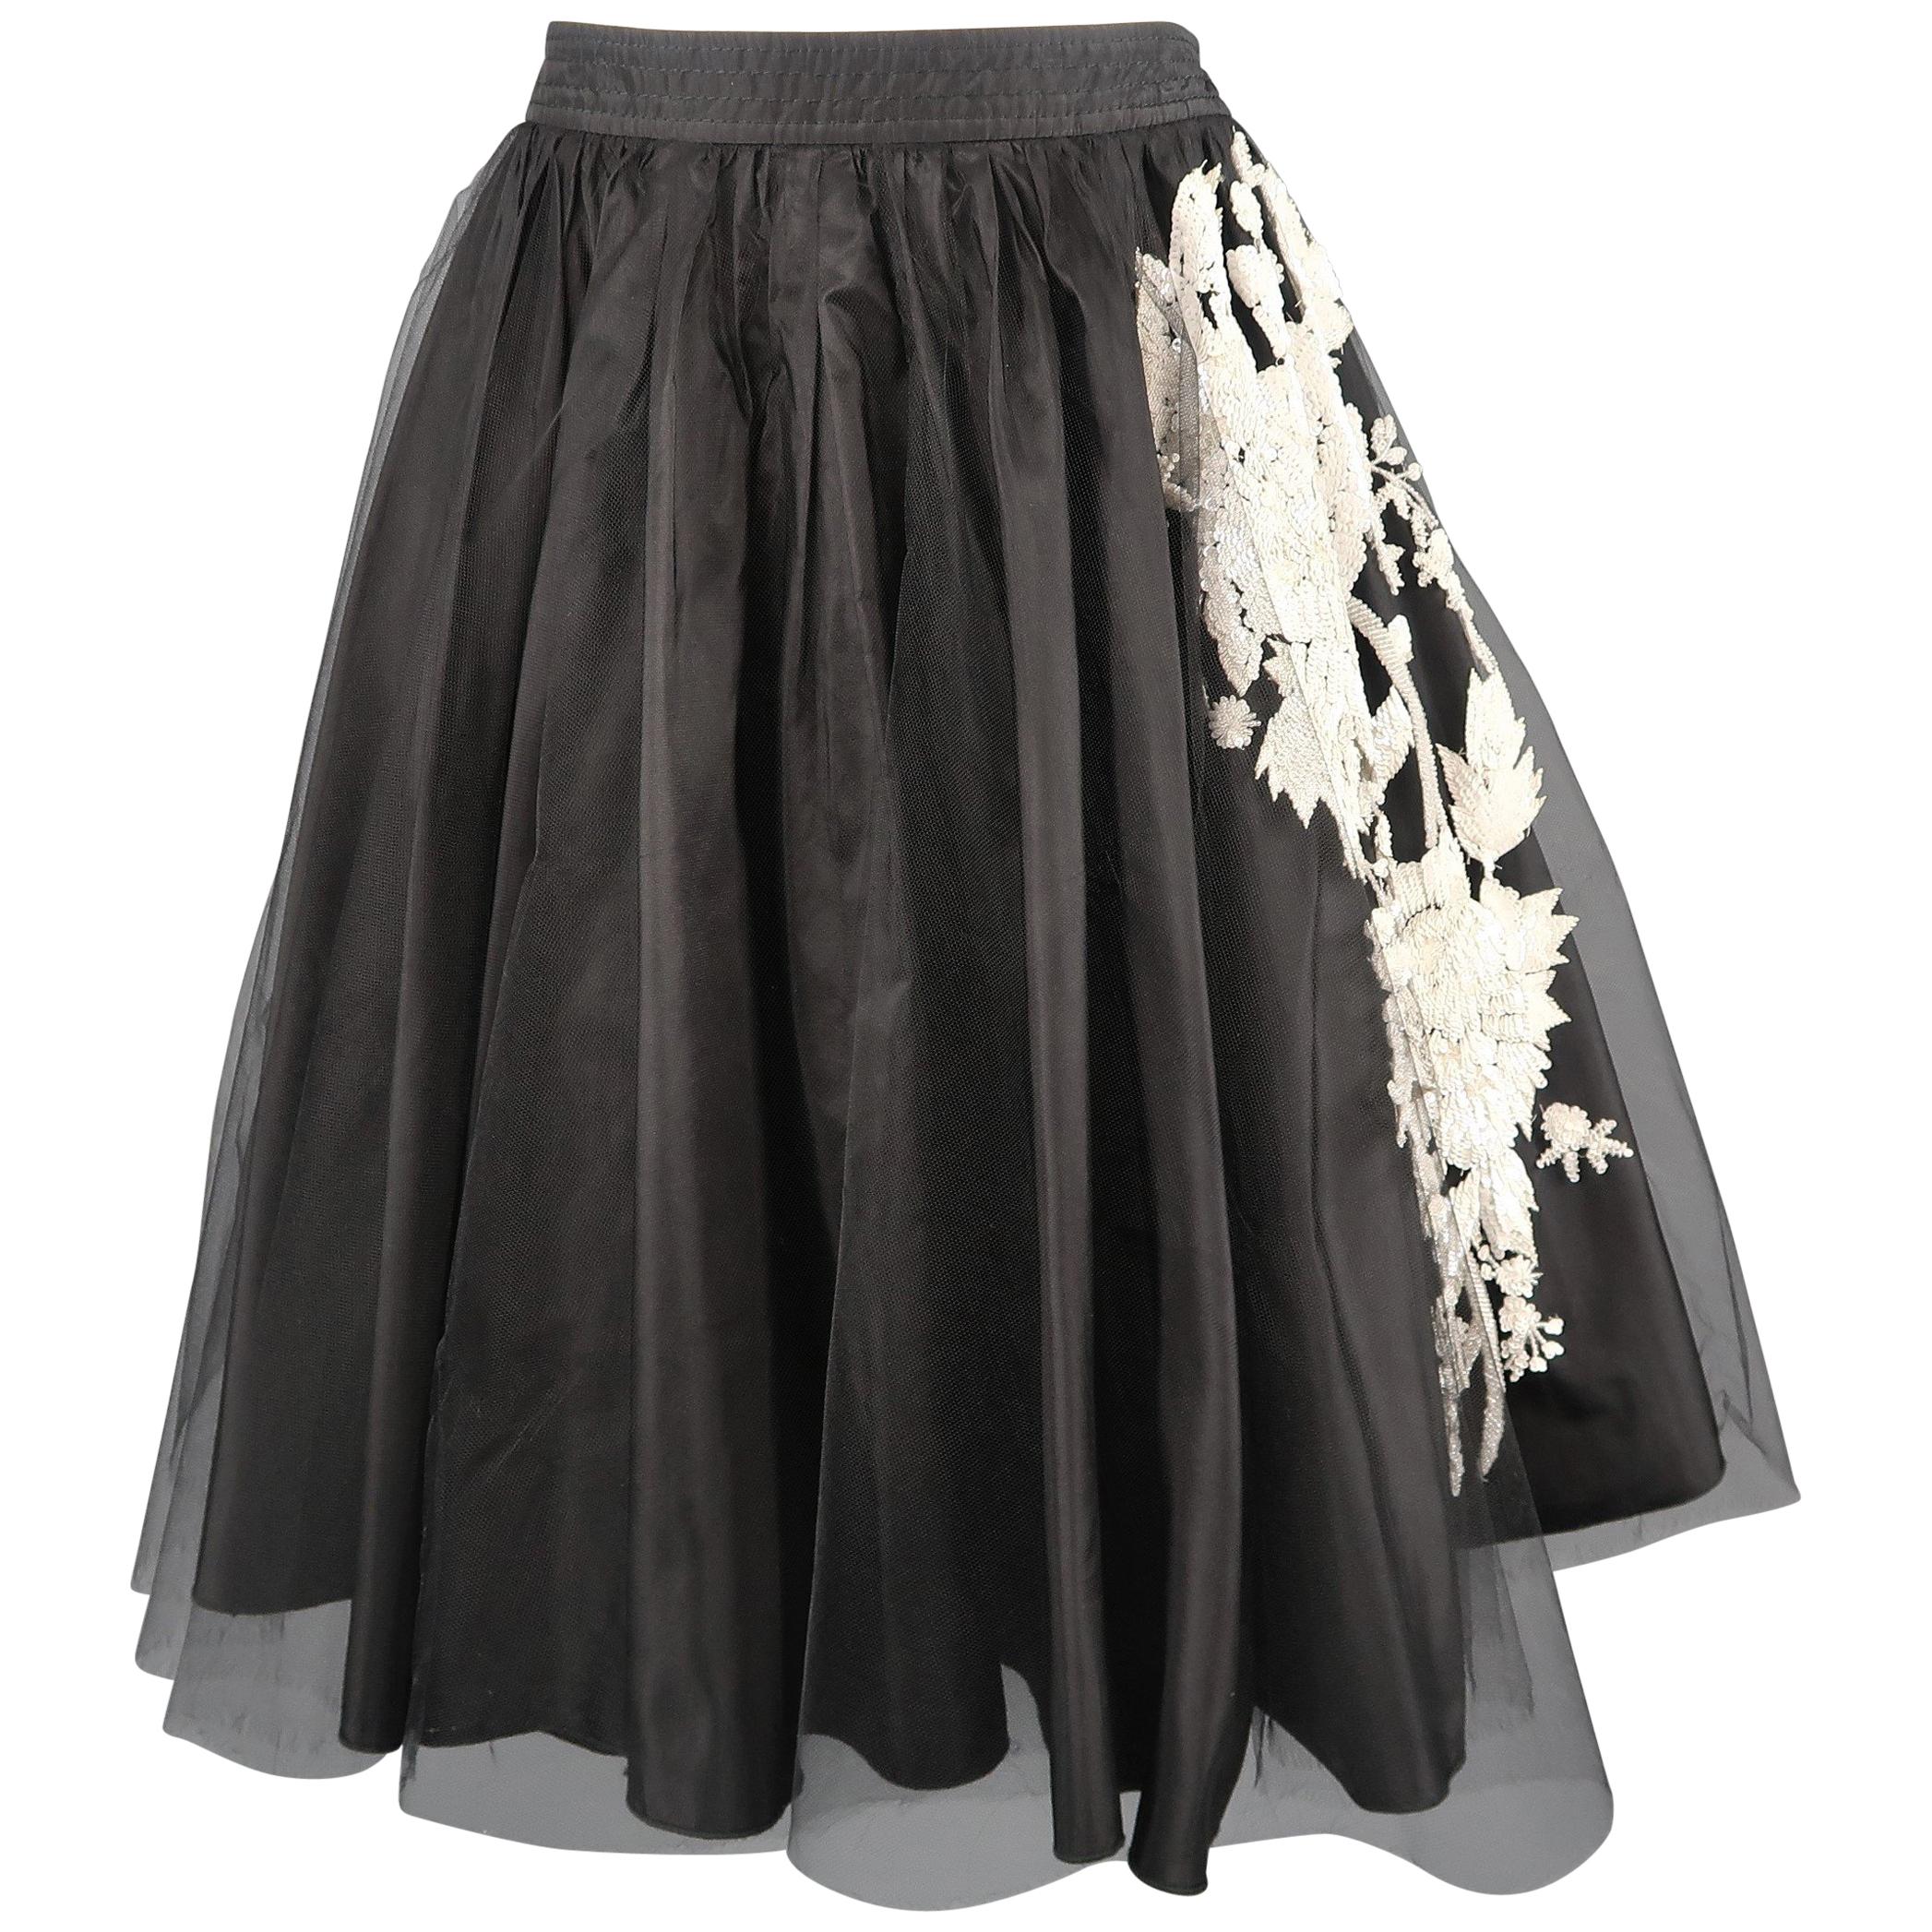 VALENTINO Size 4 Black Floral Sequin Tulle Overlay A Line Skirt